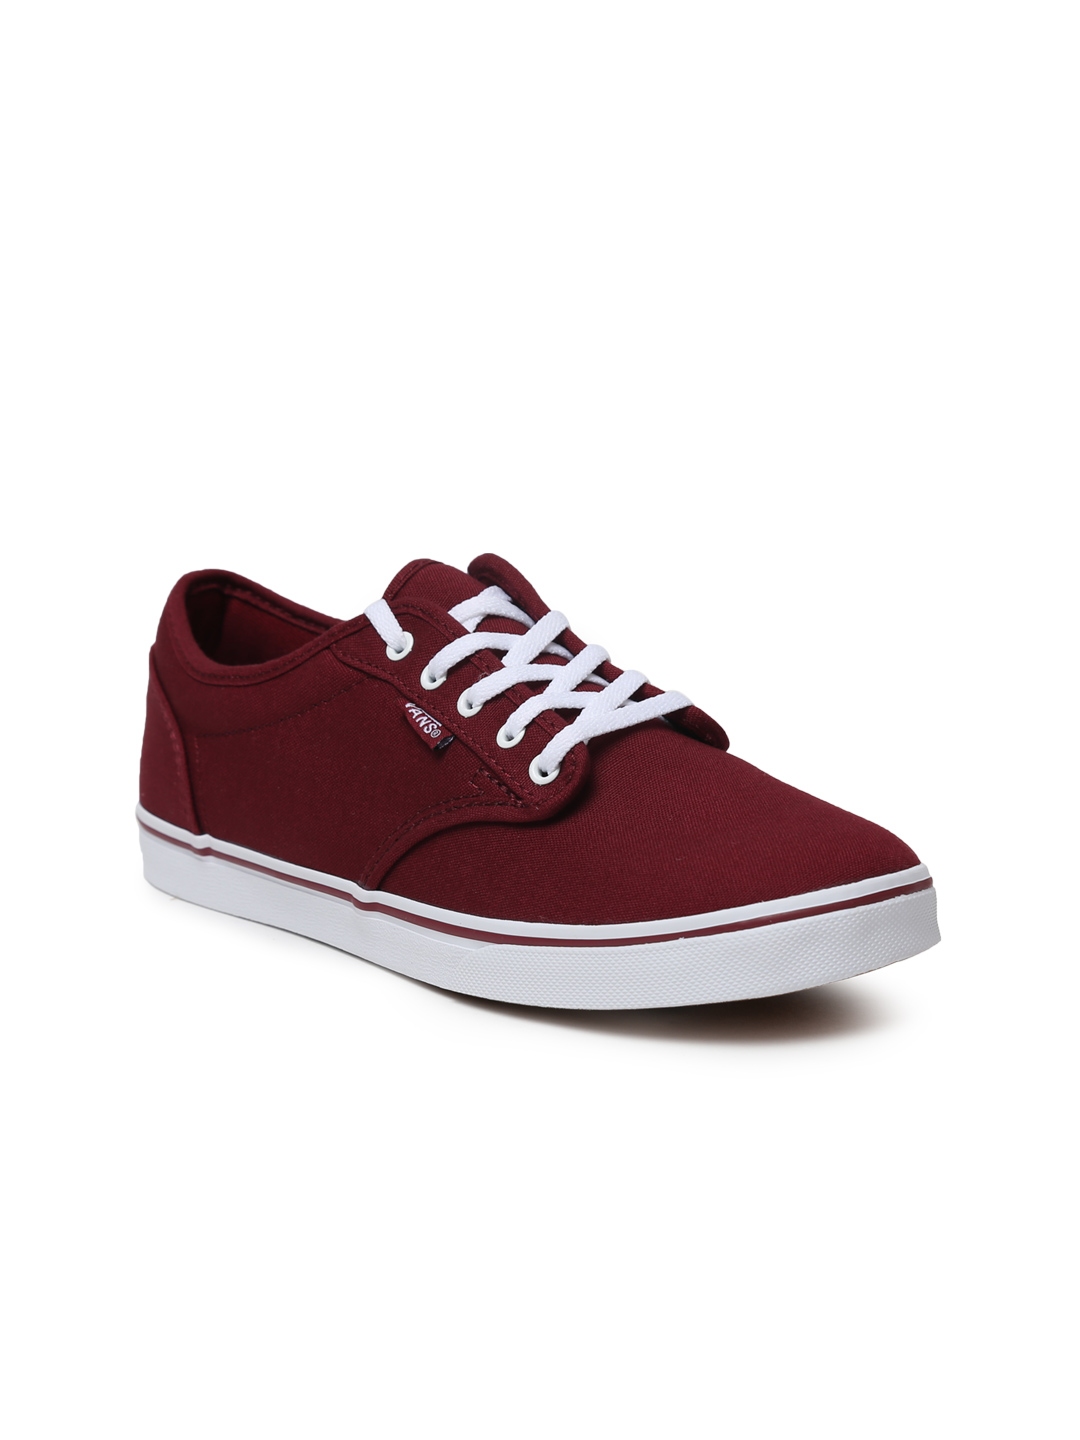 Buy Vans Women Burgundy Atwood Low Sneakers - Casual Shoes for Women ...